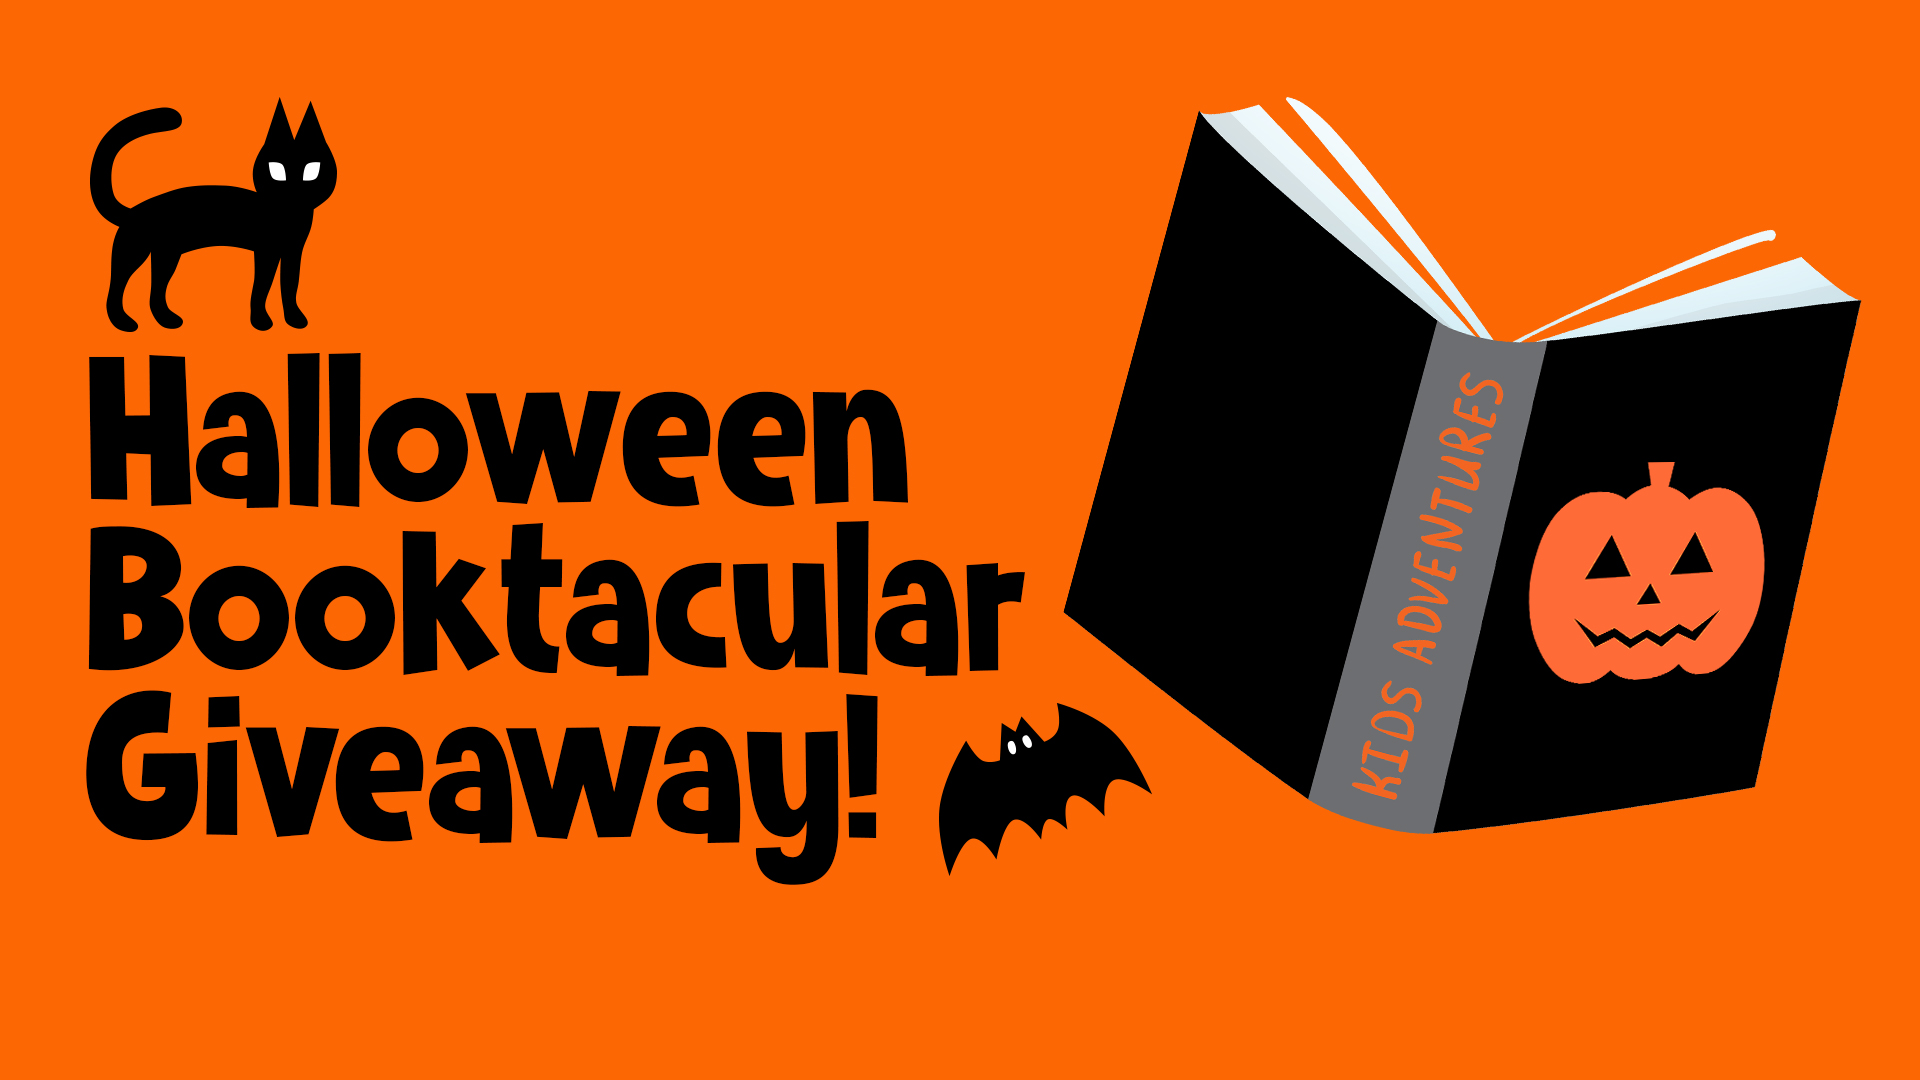 Image for Halloween Booktacular Giveaway